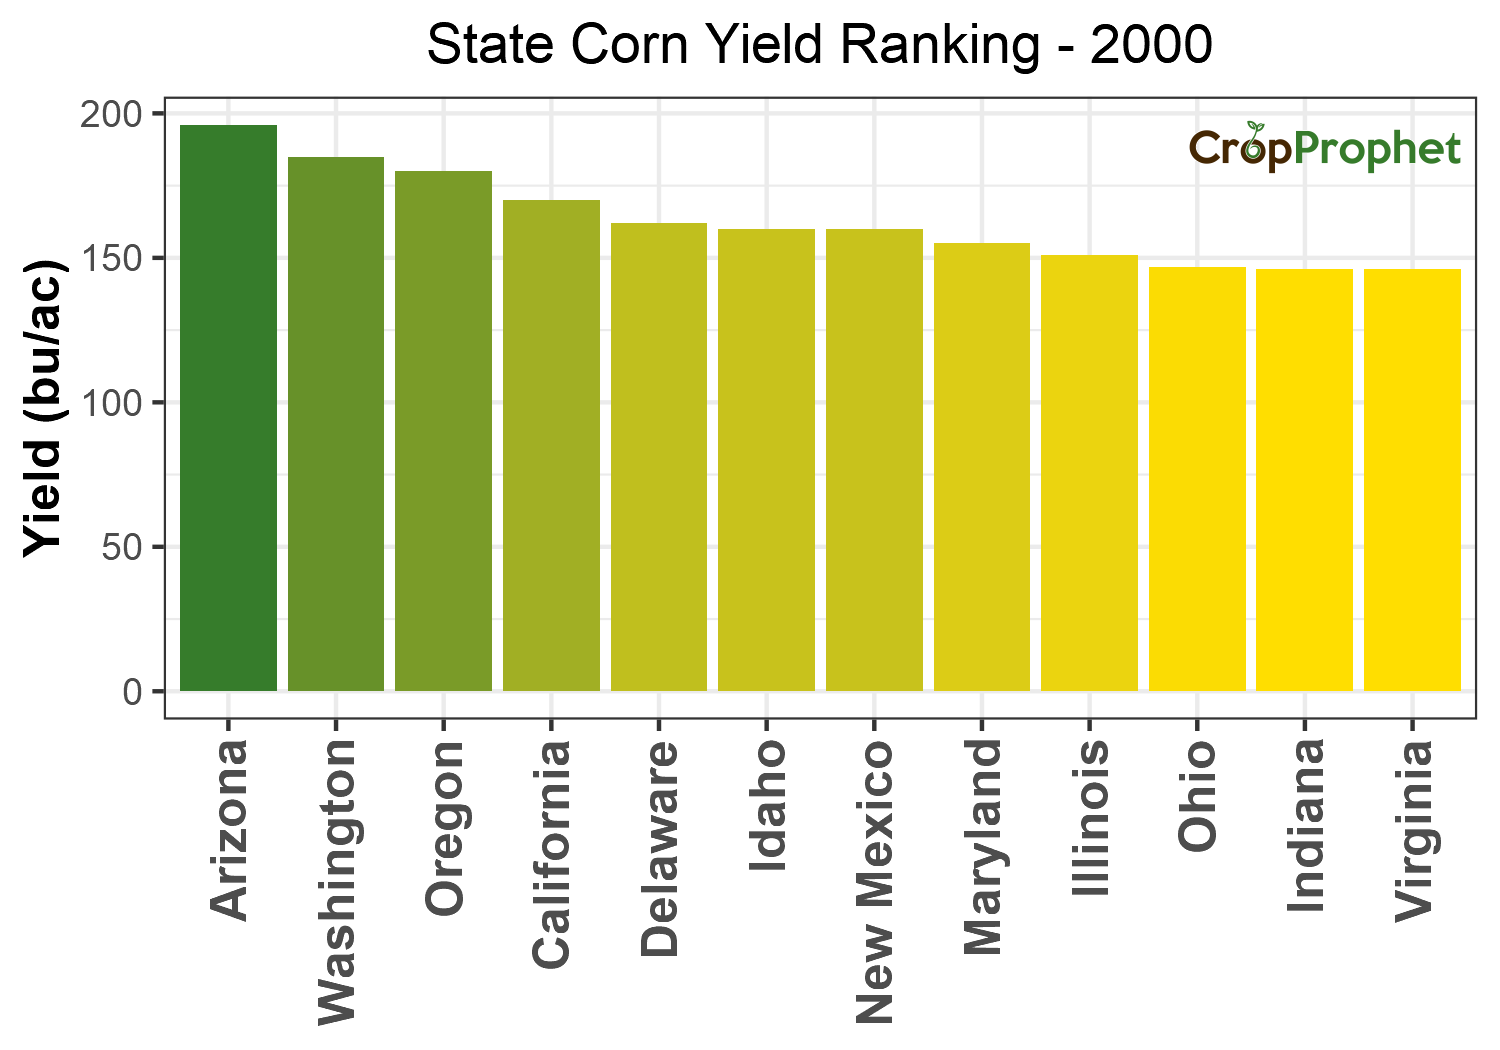 Corn Production by State - 2000 Rankings